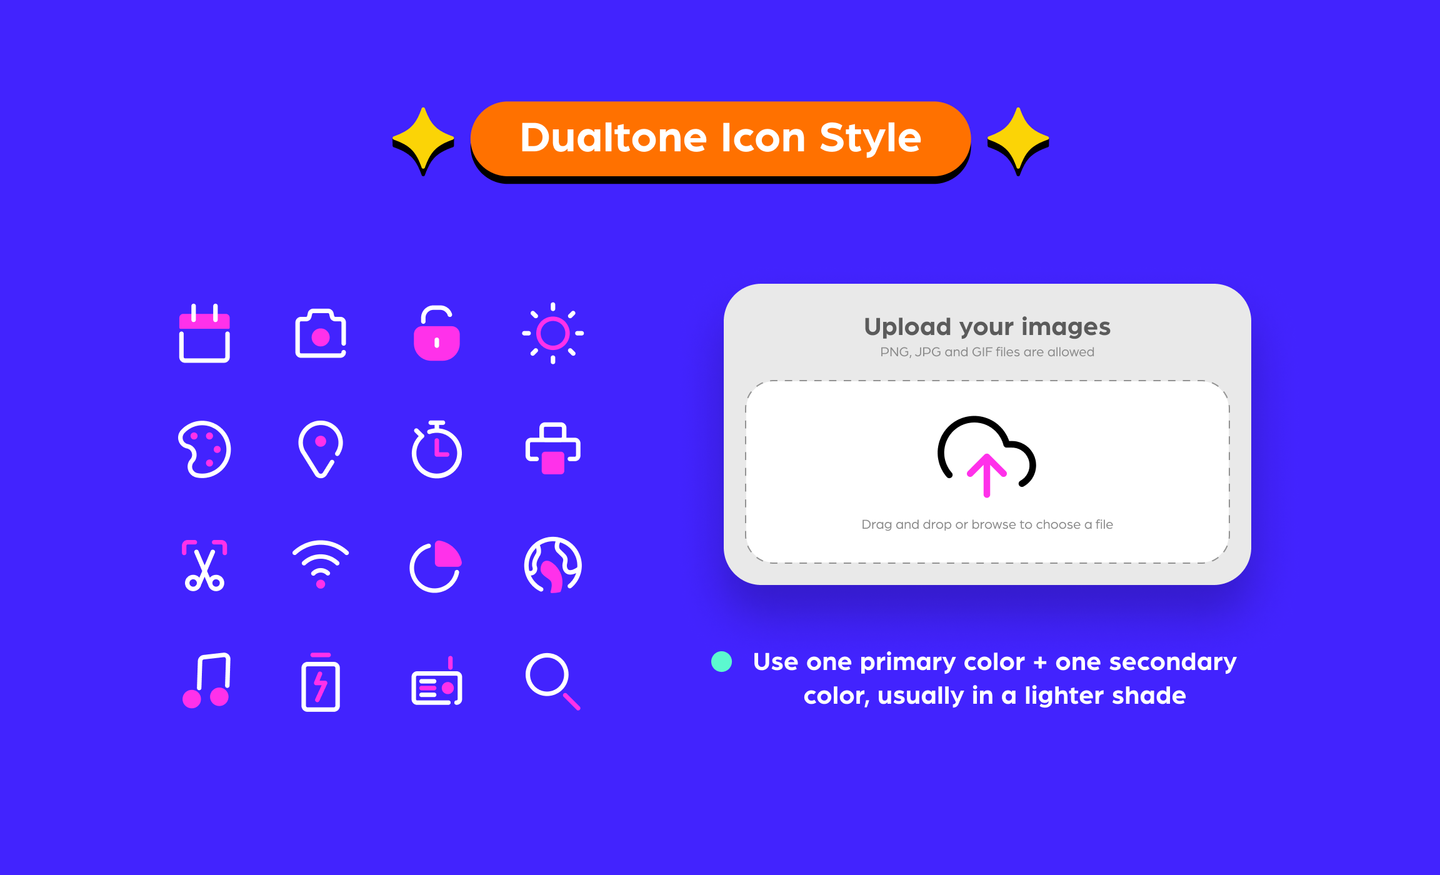 A guide to the dualtone icon style